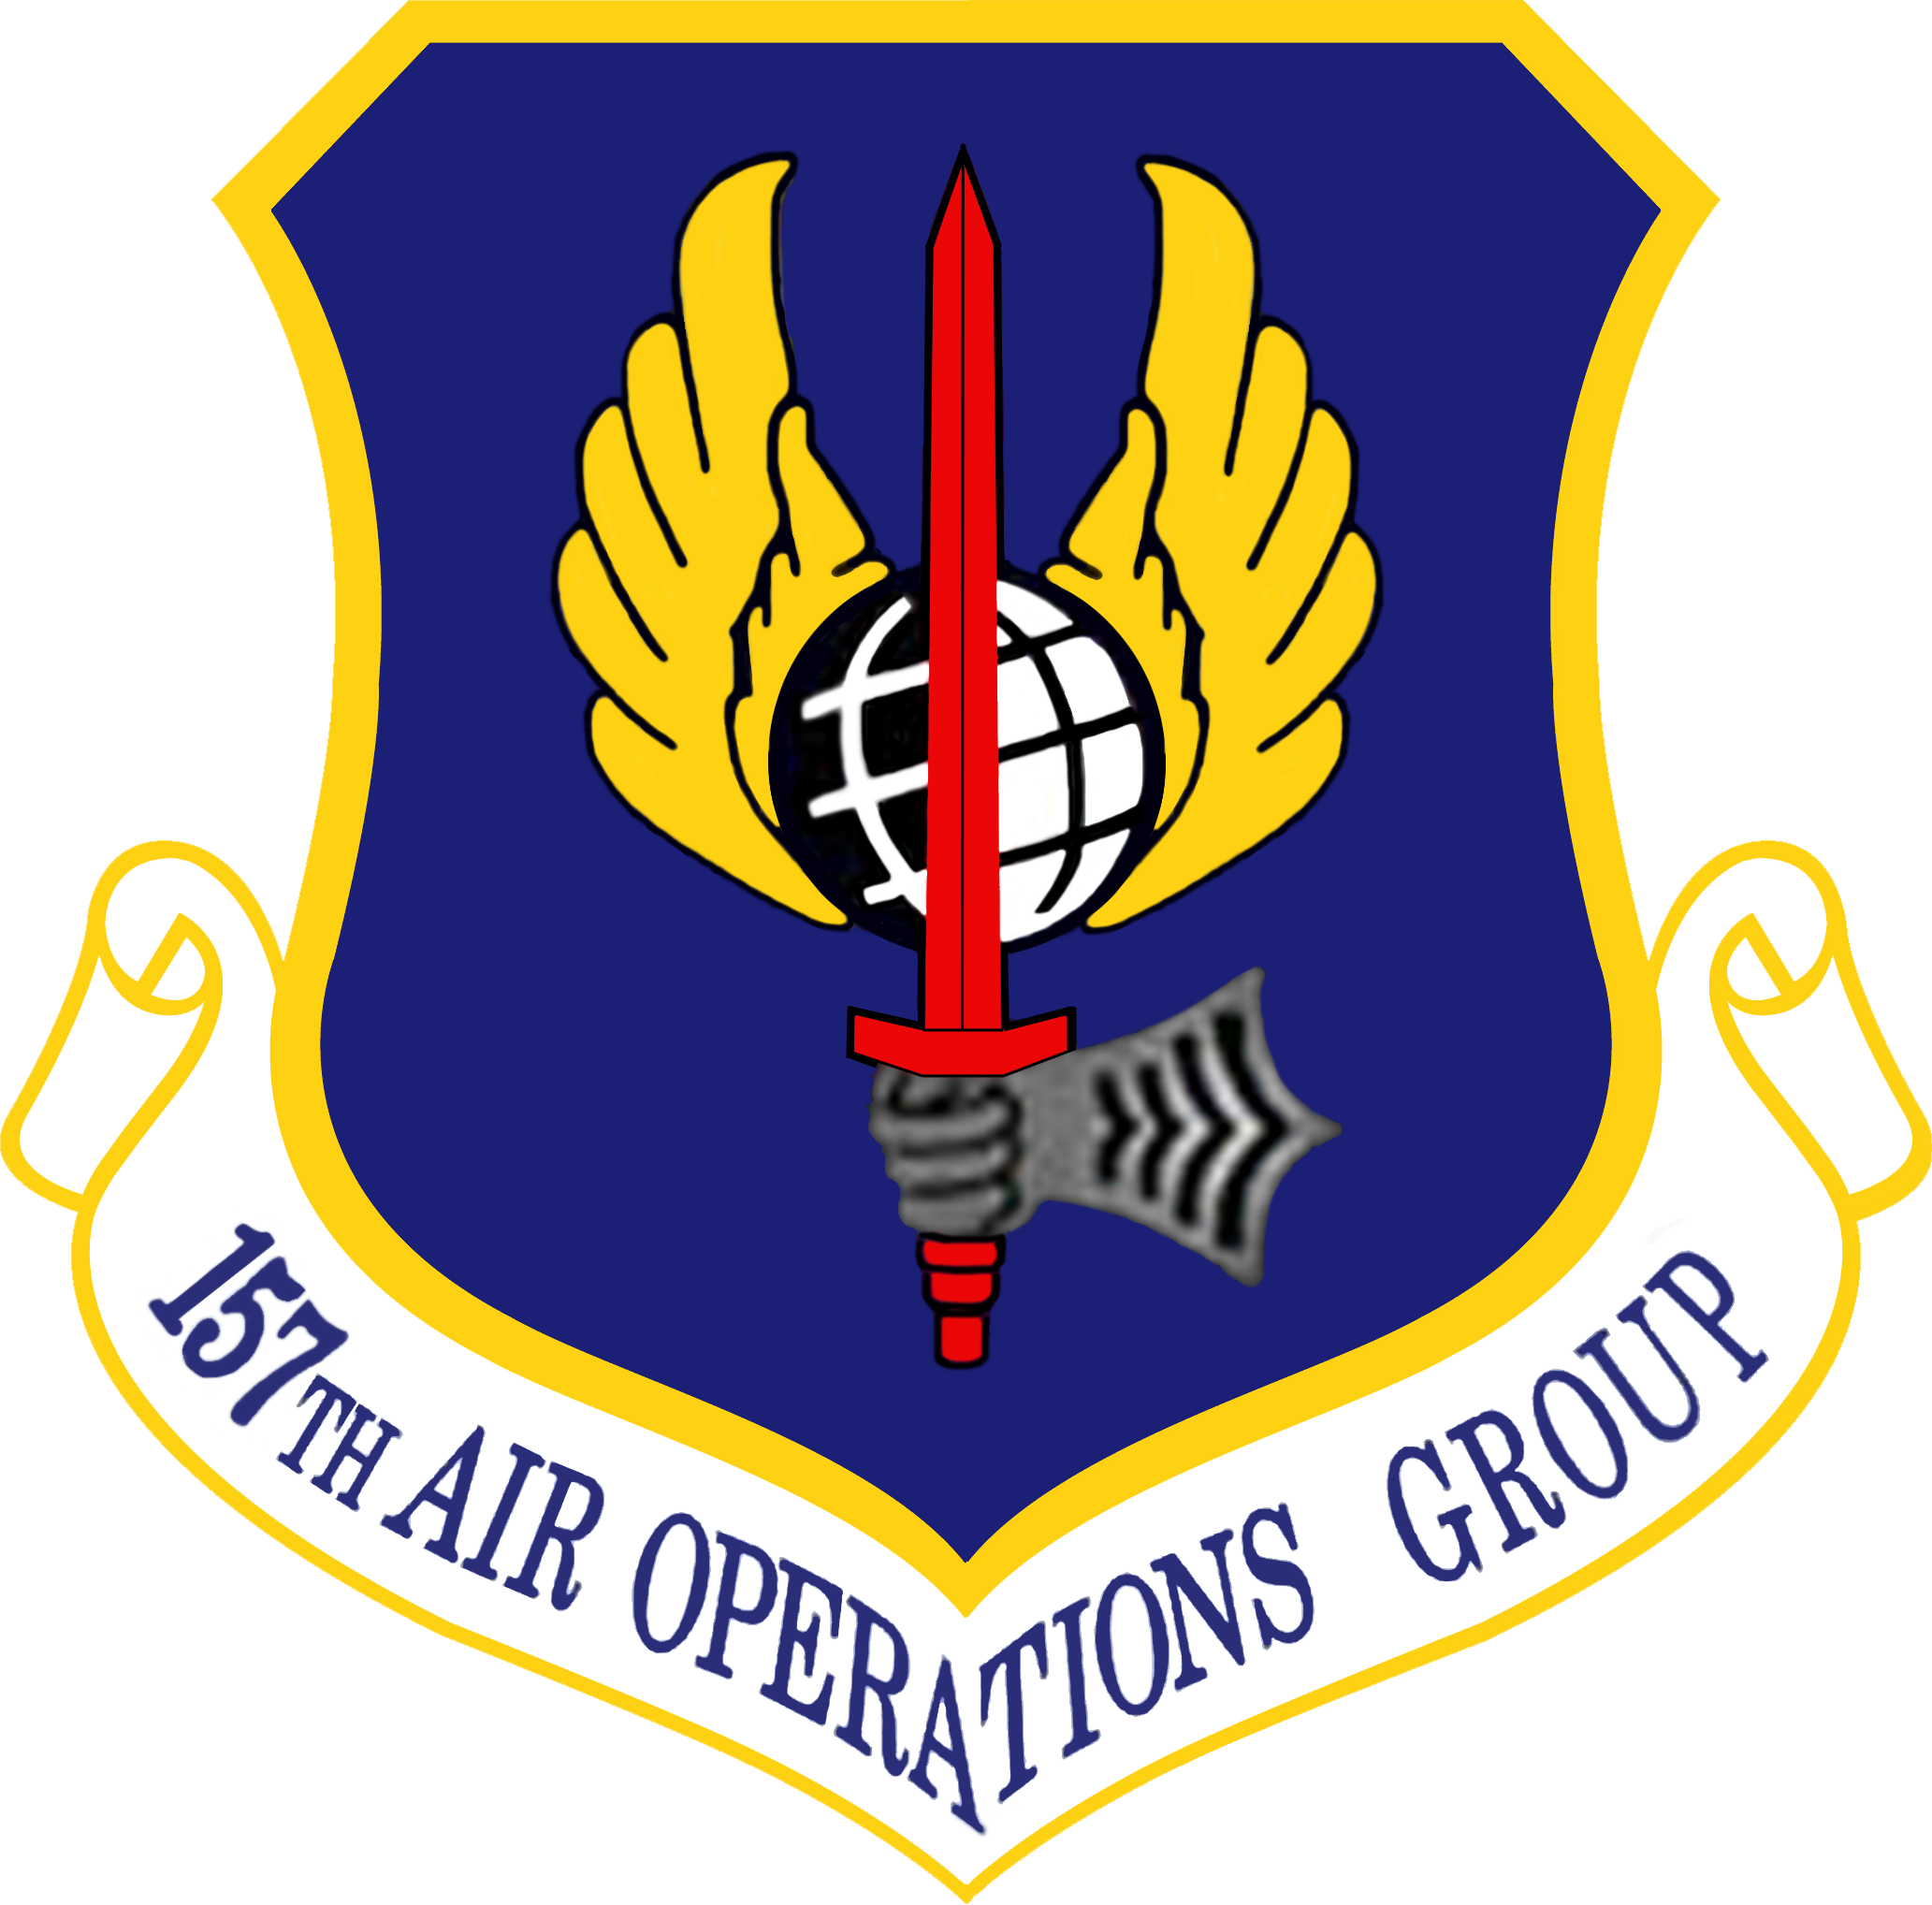 157th Air Operations Group - Wikipedia